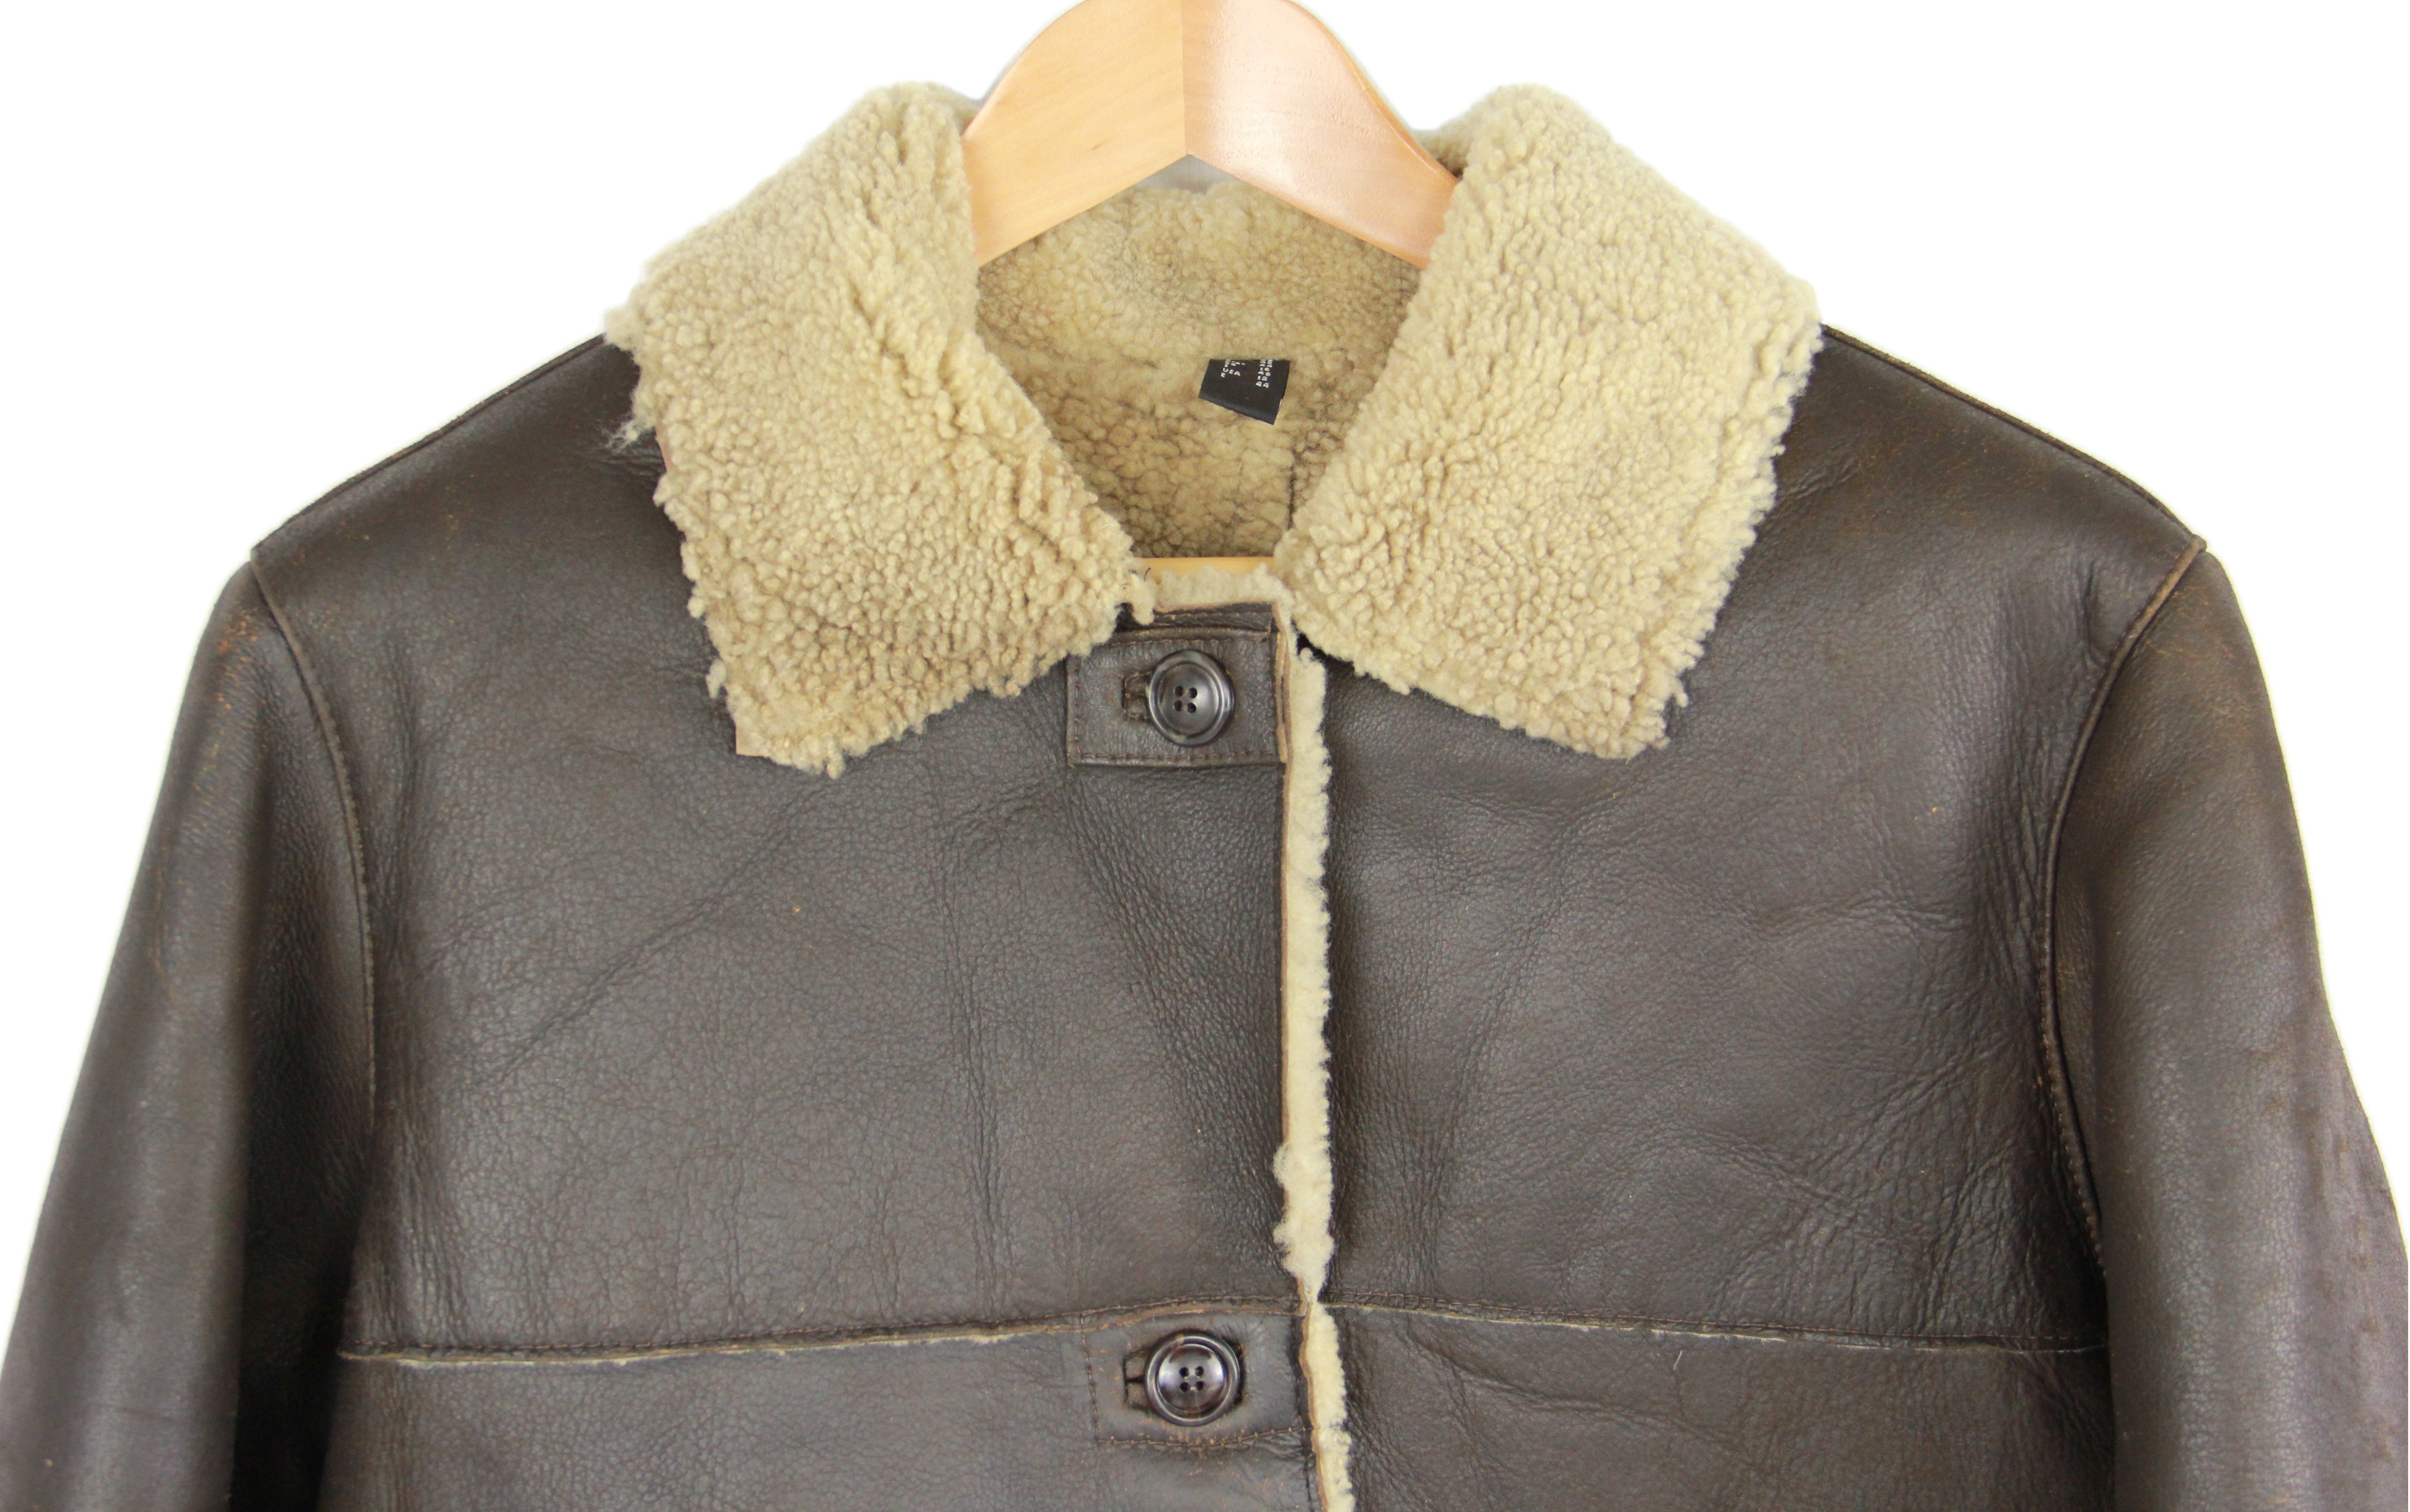 Women's Brown Lambskin Leather Shearling Coat With Raw Edges, SIZE L